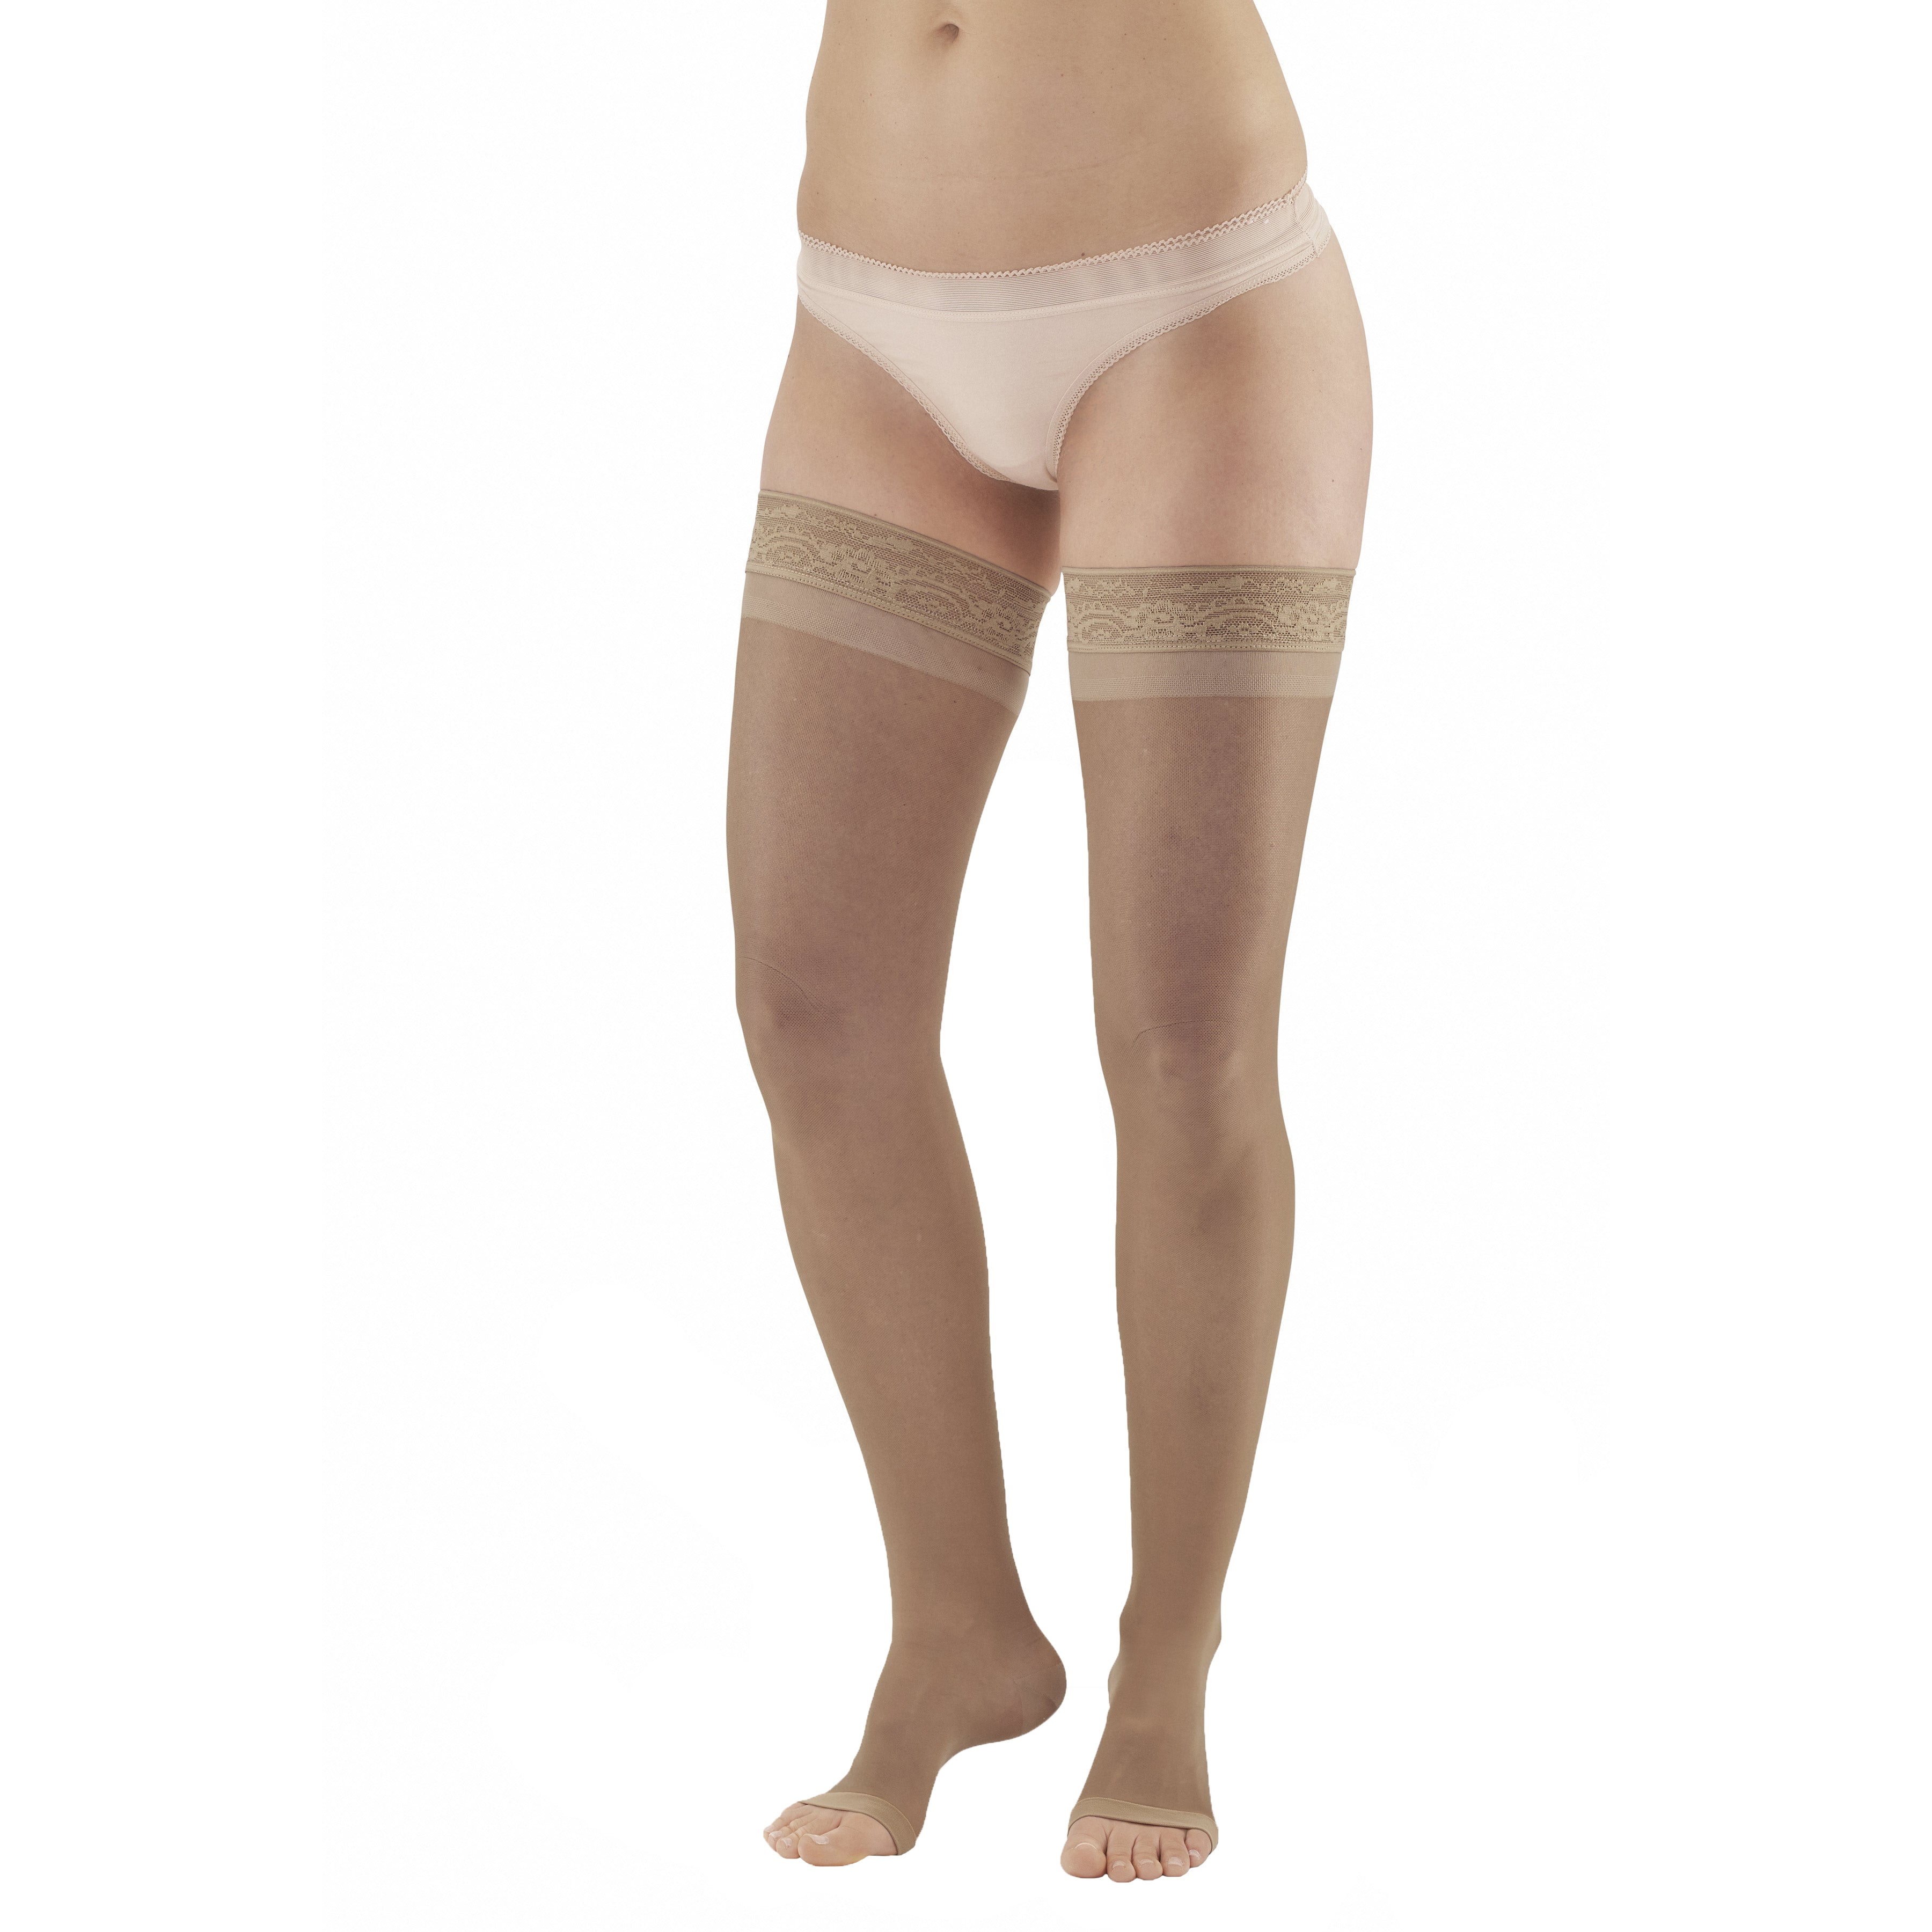 Ames Walker Aw Style 45 Sheer Support 15 20 Mmhg Moderate Compression